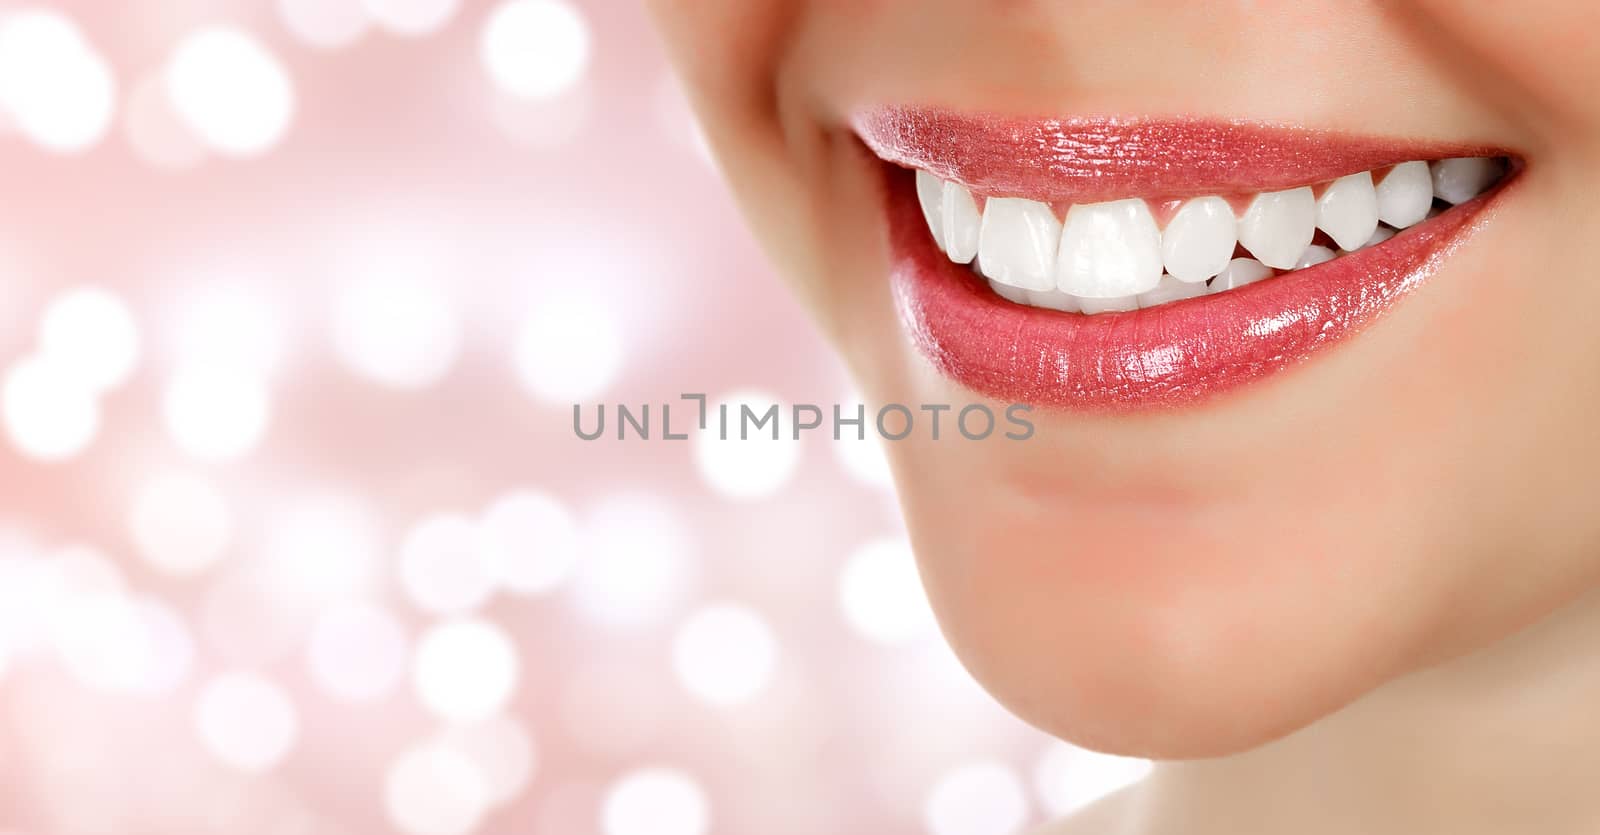 Woman smile closeup against an abstract background with blurred lights